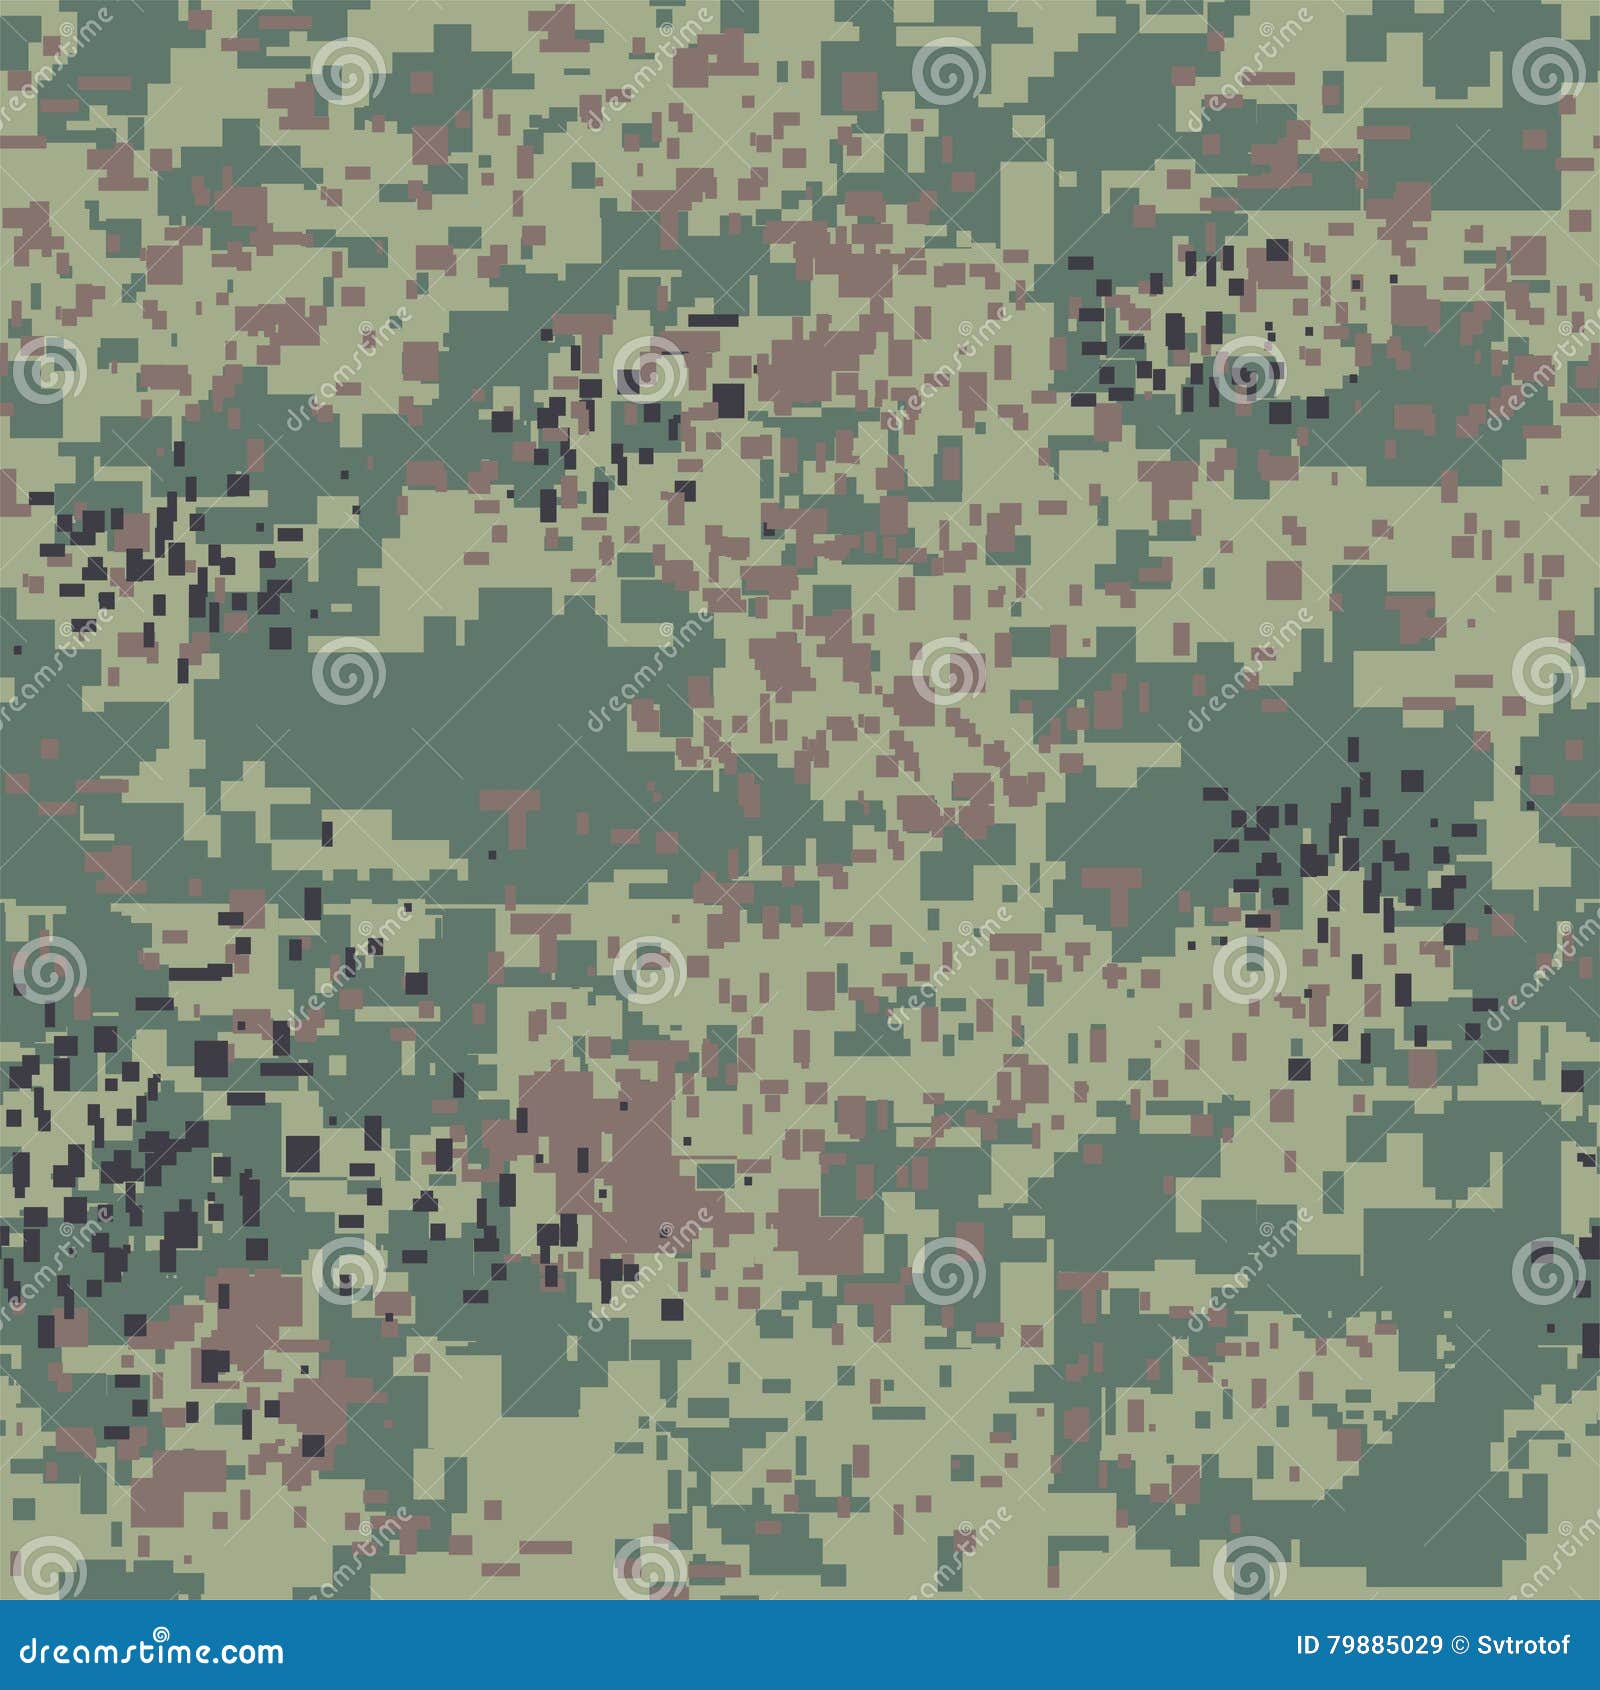 Digital Pixel Camouflage Seamless Pattern for Your Design. Vector ...